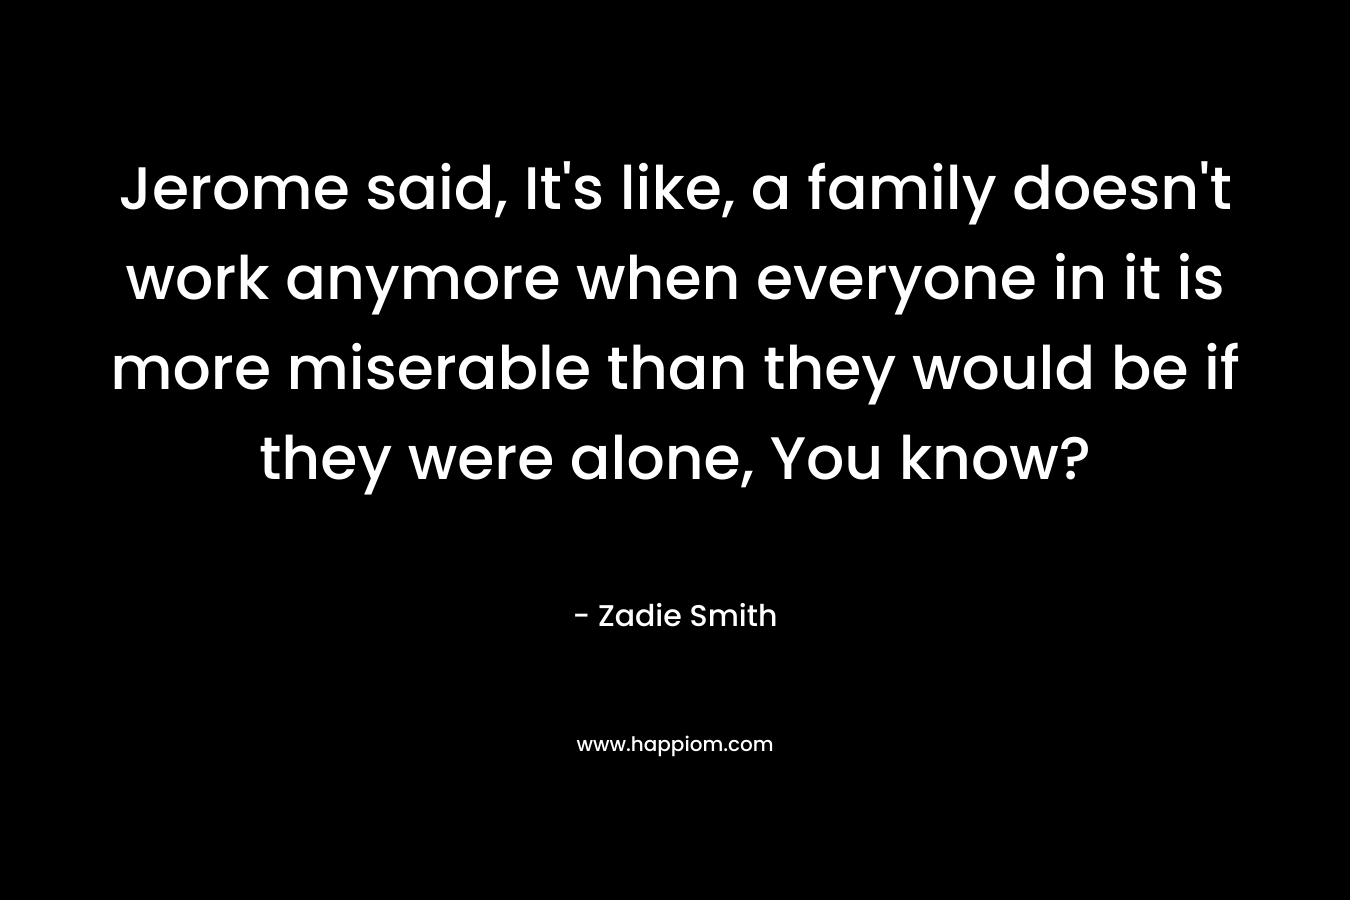 Jerome said, It’s like, a family doesn’t work anymore when everyone in it is more miserable than they would be if they were alone, You know? – Zadie Smith